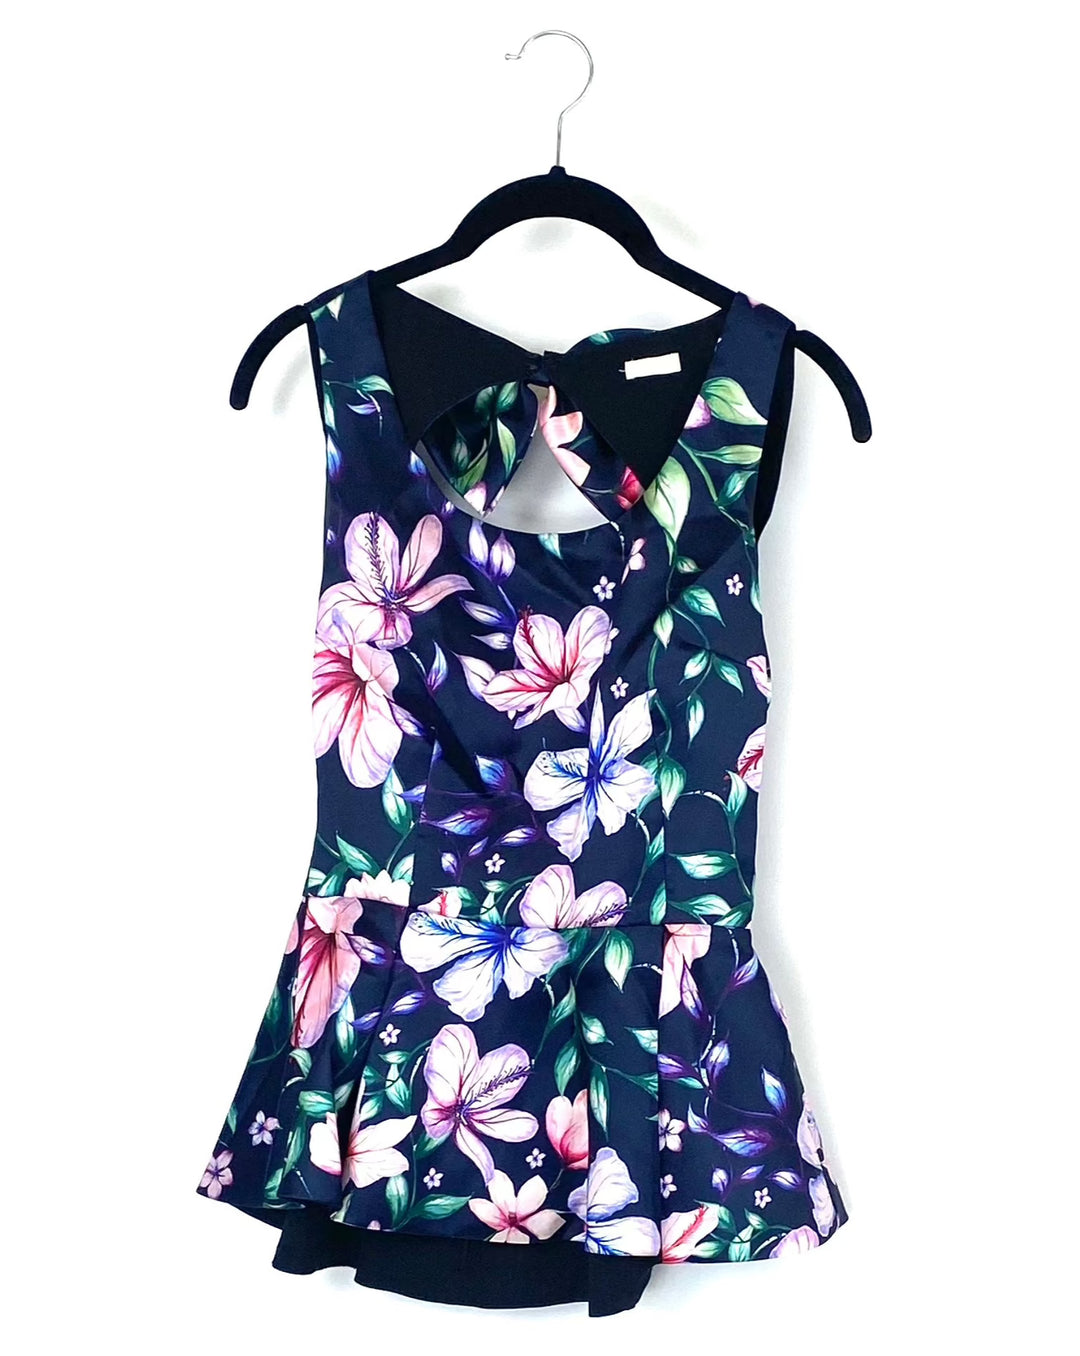 Sleeveless Floral Top - Extra Small